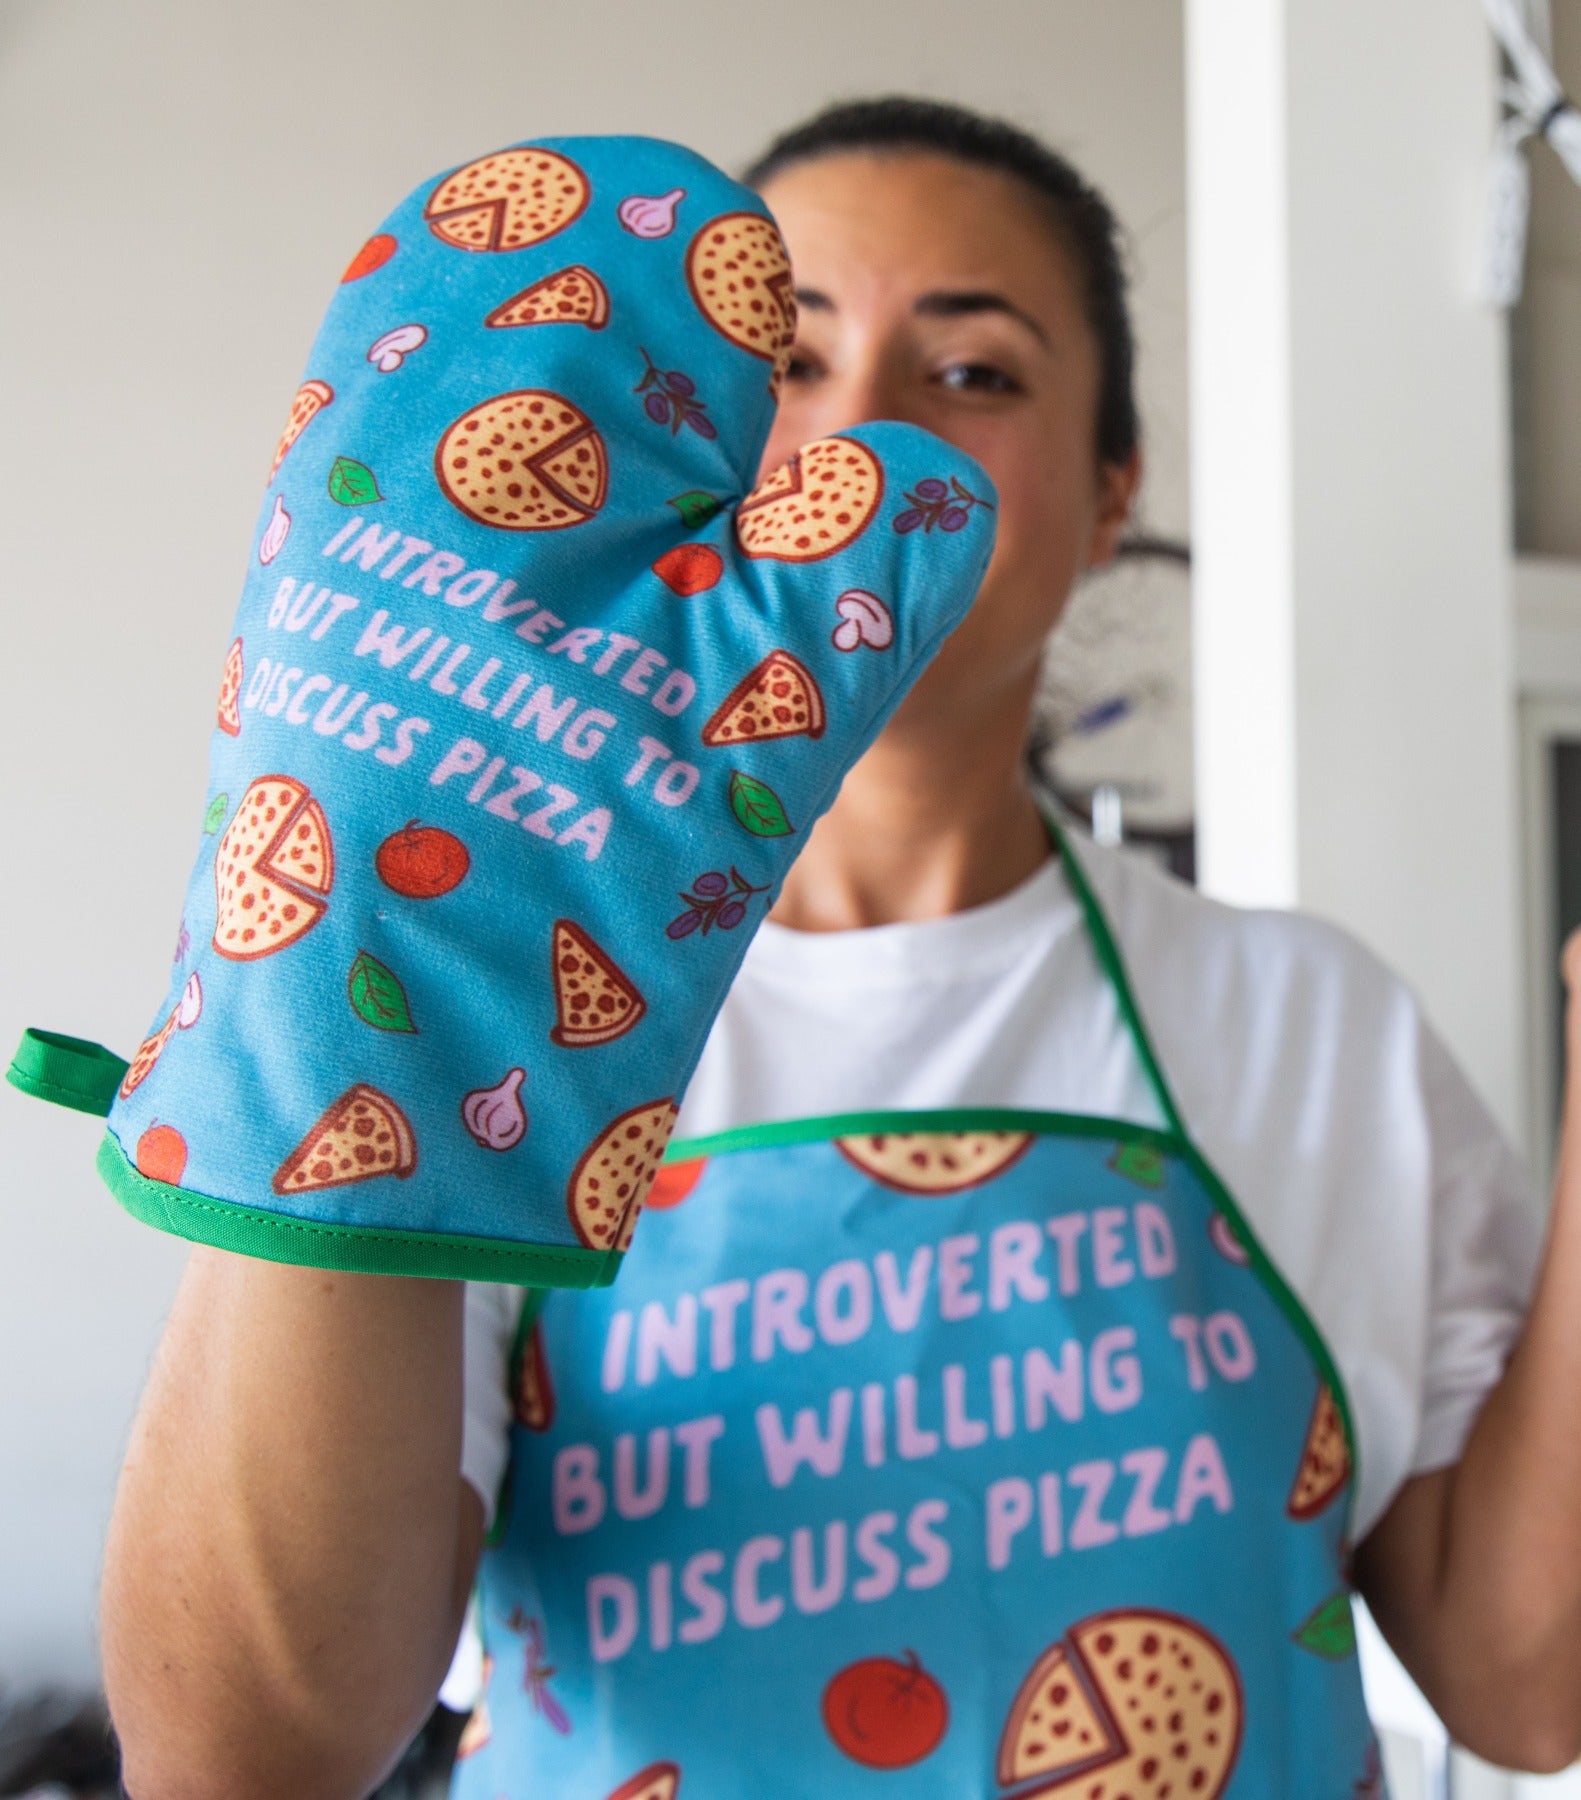 Funny Blue Introverted But Willing To Discuss Pizza Oven Mitt + Apron Nerdy Food Tee